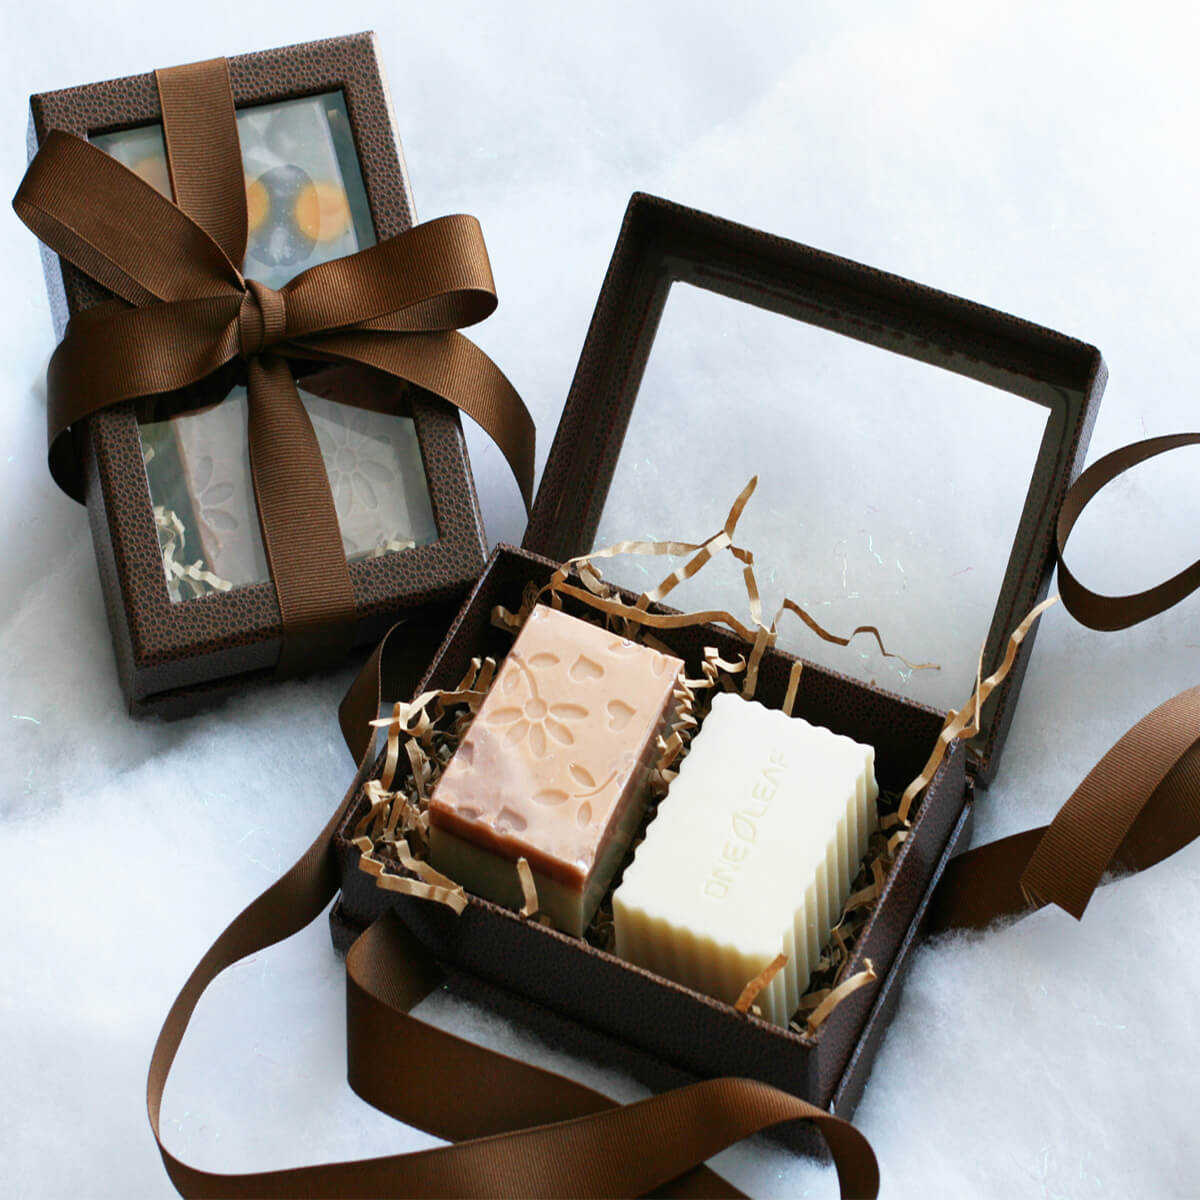 Custom Size Soap Boxes: How to Make Your Own?